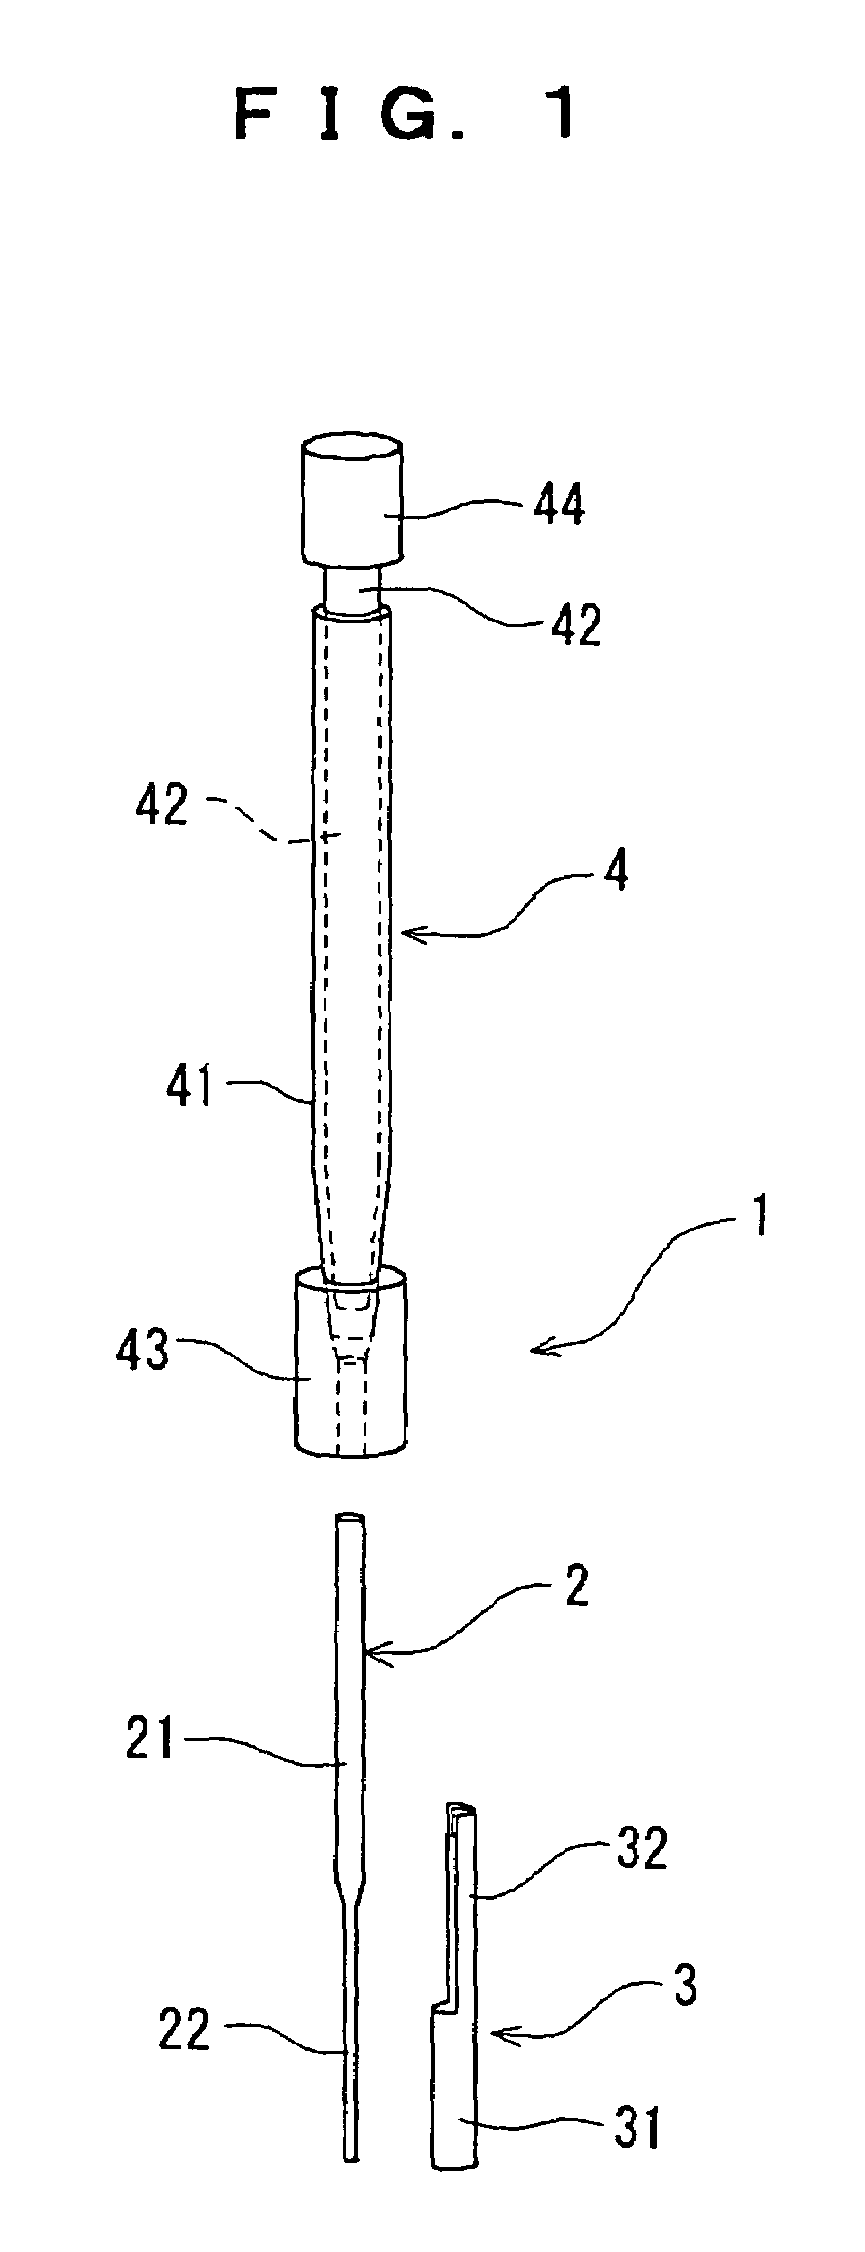 Egg freezing and storing tool and method